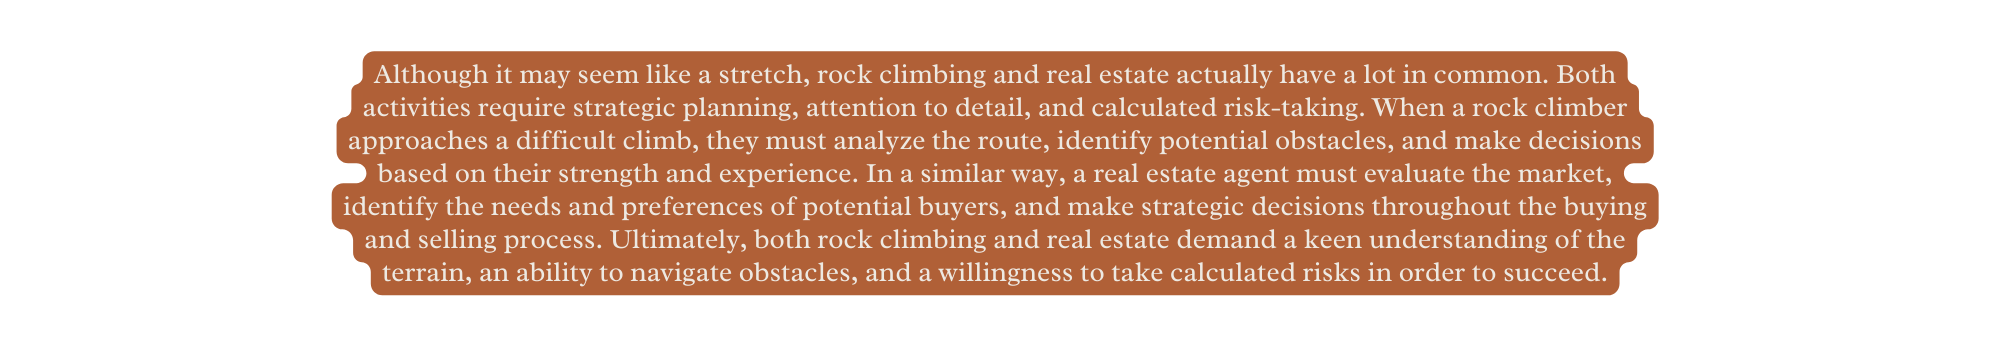 Although it may seem like a stretch rock climbing and real estate actually have a lot in common Both activities require strategic planning attention to detail and calculated risk taking When a rock climber approaches a difficult climb they must analyze the route identify potential obstacles and make decisions based on their strength and experience In a similar way a real estate agent must evaluate the market identify the needs and preferences of potential buyers and make strategic decisions throughout the buying and selling process Ultimately both rock climbing and real estate demand a keen understanding of the terrain an ability to navigate obstacles and a willingness to take calculated risks in order to succeed